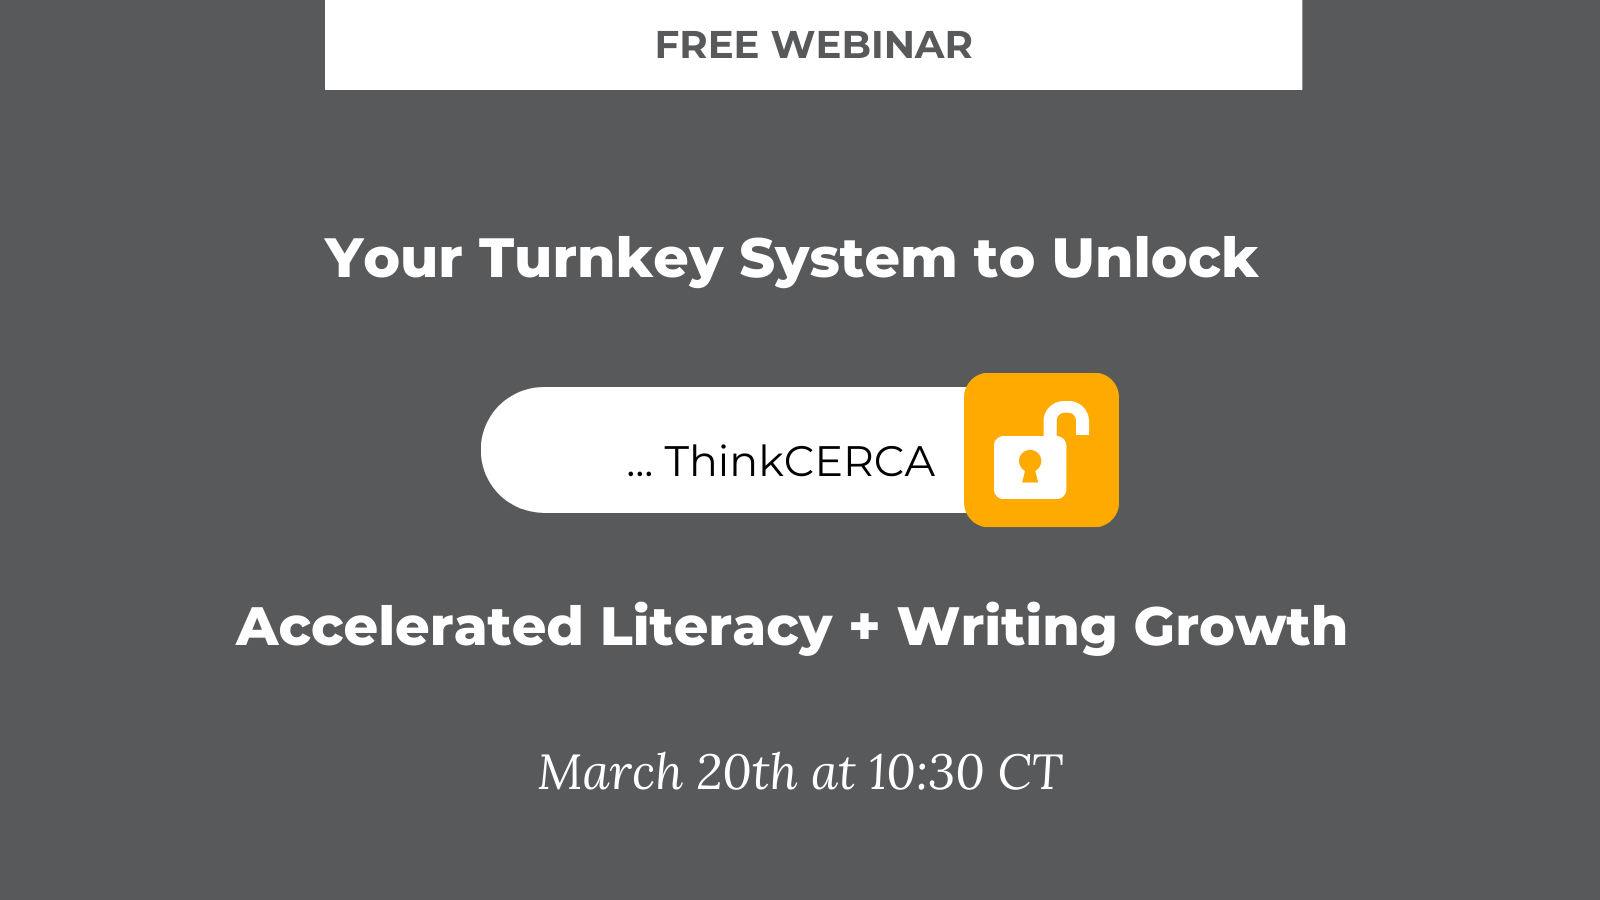 Here's Your Turnkey System to Unlock Accelerated Literacy + Writing Growth 